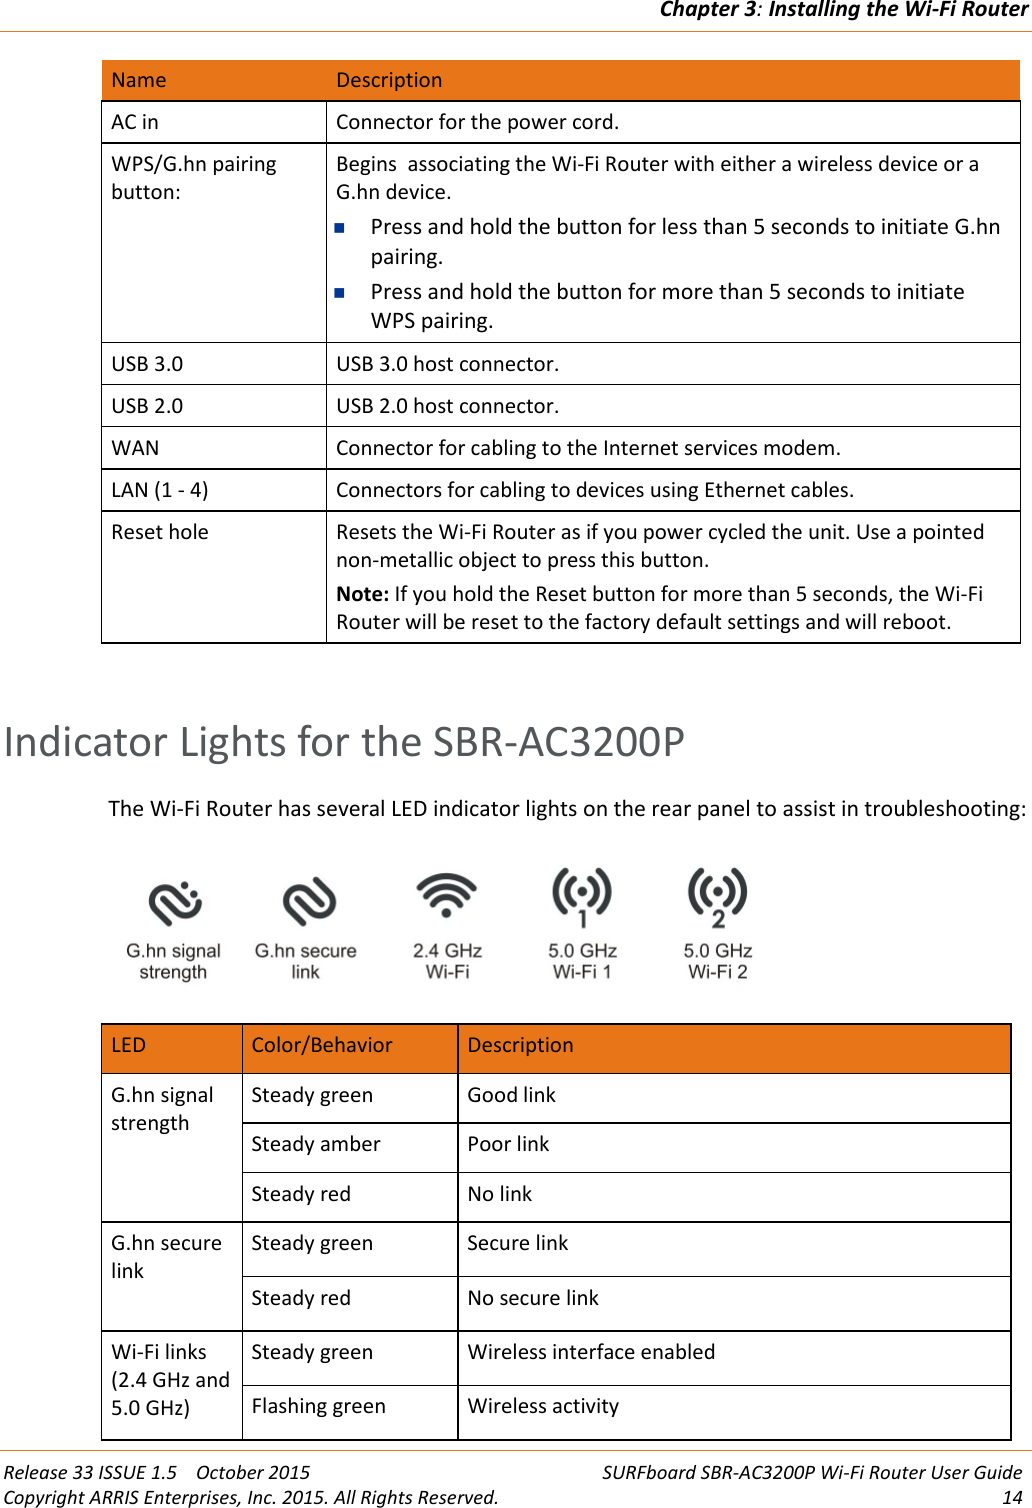 Chapter 3:Installing the Wi-Fi RouterRelease 33 ISSUE 1.5 October 2015 SURFboard SBR-AC3200P Wi-Fi Router User GuideCopyright ARRIS Enterprises, Inc. 2015. All Rights Reserved. 14Name DescriptionAC in Connector for the power cord.WPS/G.hn pairingbutton:Begins associating the Wi-Fi Router with either a wireless device or aG.hn device.Press and hold the button for less than 5 seconds to initiate G.hnpairing.Press and hold the button for more than 5 seconds to initiateWPS pairing.USB 3.0 USB 3.0 host connector.USB 2.0 USB 2.0 host connector.WAN Connector for cabling to the Internet services modem.LAN (1 - 4) Connectors for cabling to devices using Ethernet cables.Reset hole Resets the Wi-Fi Router as if you power cycled the unit. Use a pointednon-metallic object to press this button.Note: If you hold the Reset button for more than 5 seconds, the Wi-FiRouter will be reset to the factory default settings and will reboot.Indicator Lights for the SBR-AC3200PThe Wi-Fi Router has several LED indicator lights on the rear panel to assist in troubleshooting:LED Color/Behavior DescriptionG.hn signalstrengthSteady green Good linkSteady amber Poor linkSteady red No linkG.hn securelinkSteady green Secure linkSteady red No secure linkWi-Fi links(2.4 GHz and5.0 GHz)Steady green Wireless interface enabledFlashing green Wireless activity